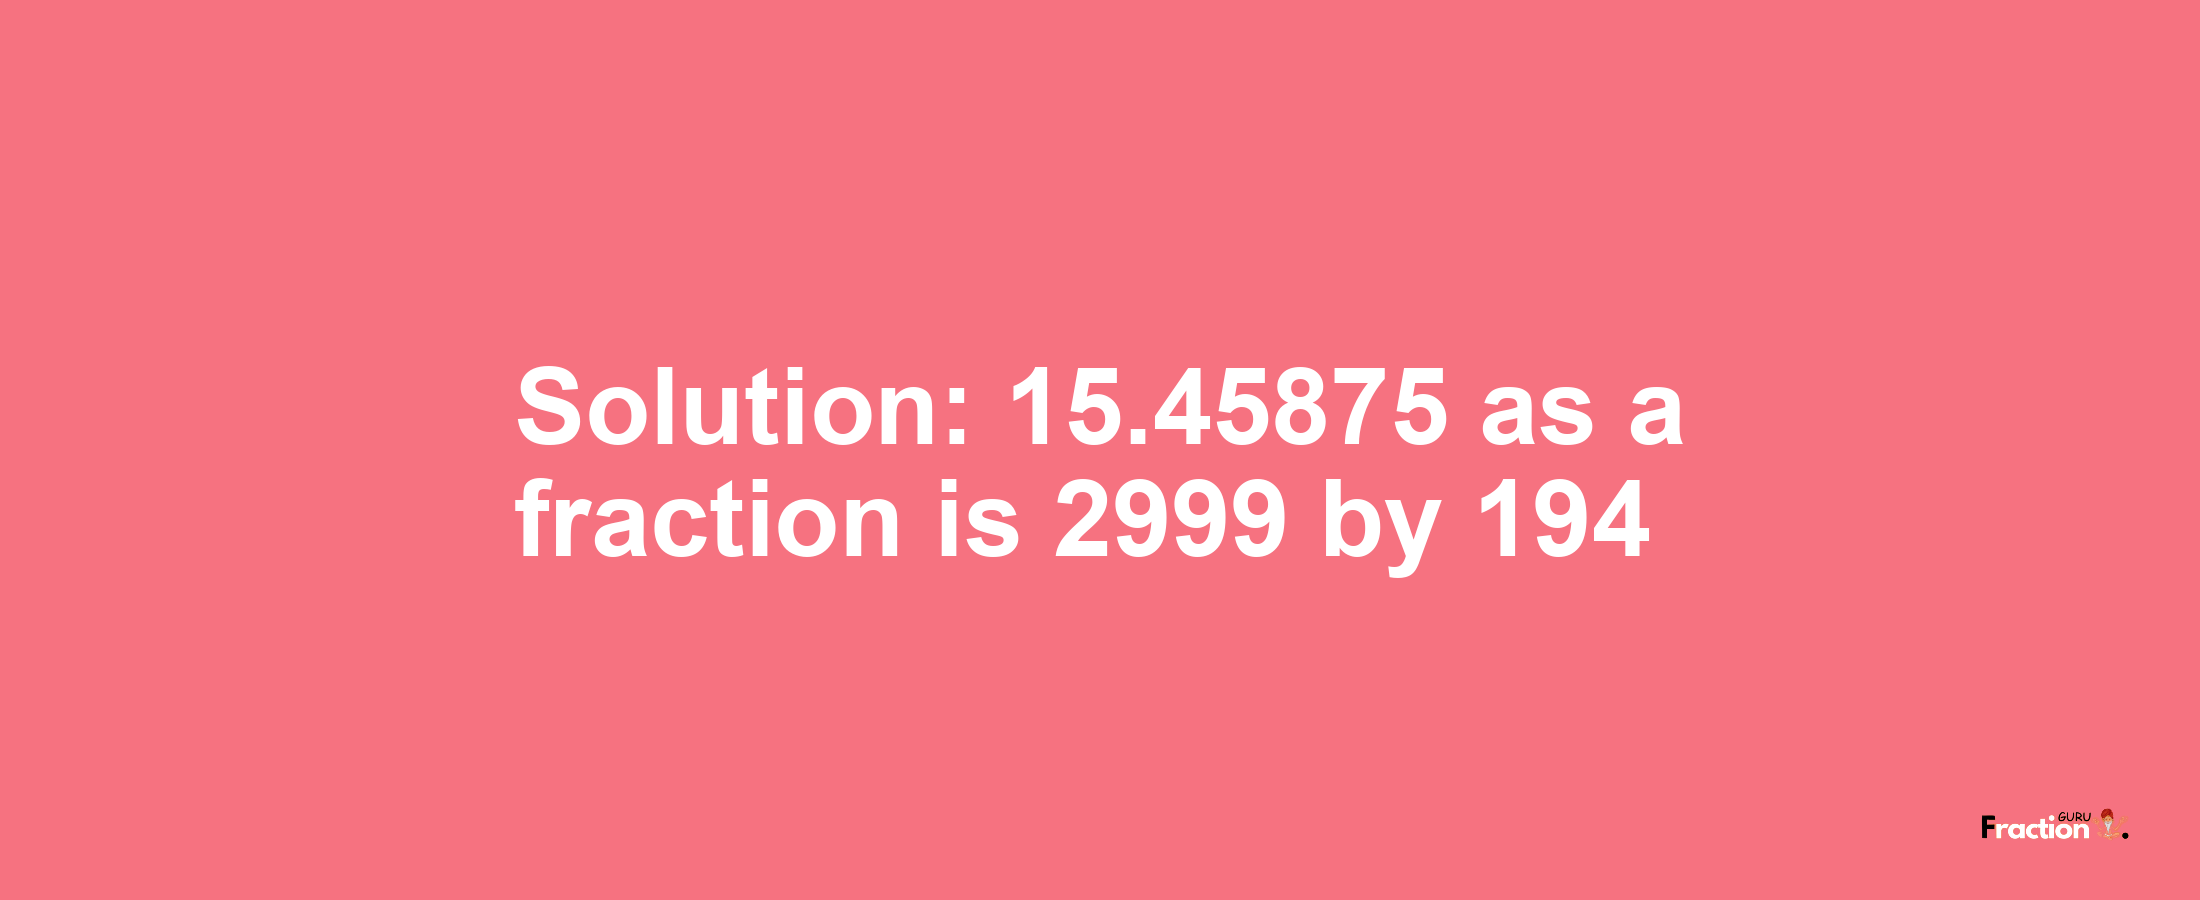 Solution:15.45875 as a fraction is 2999/194